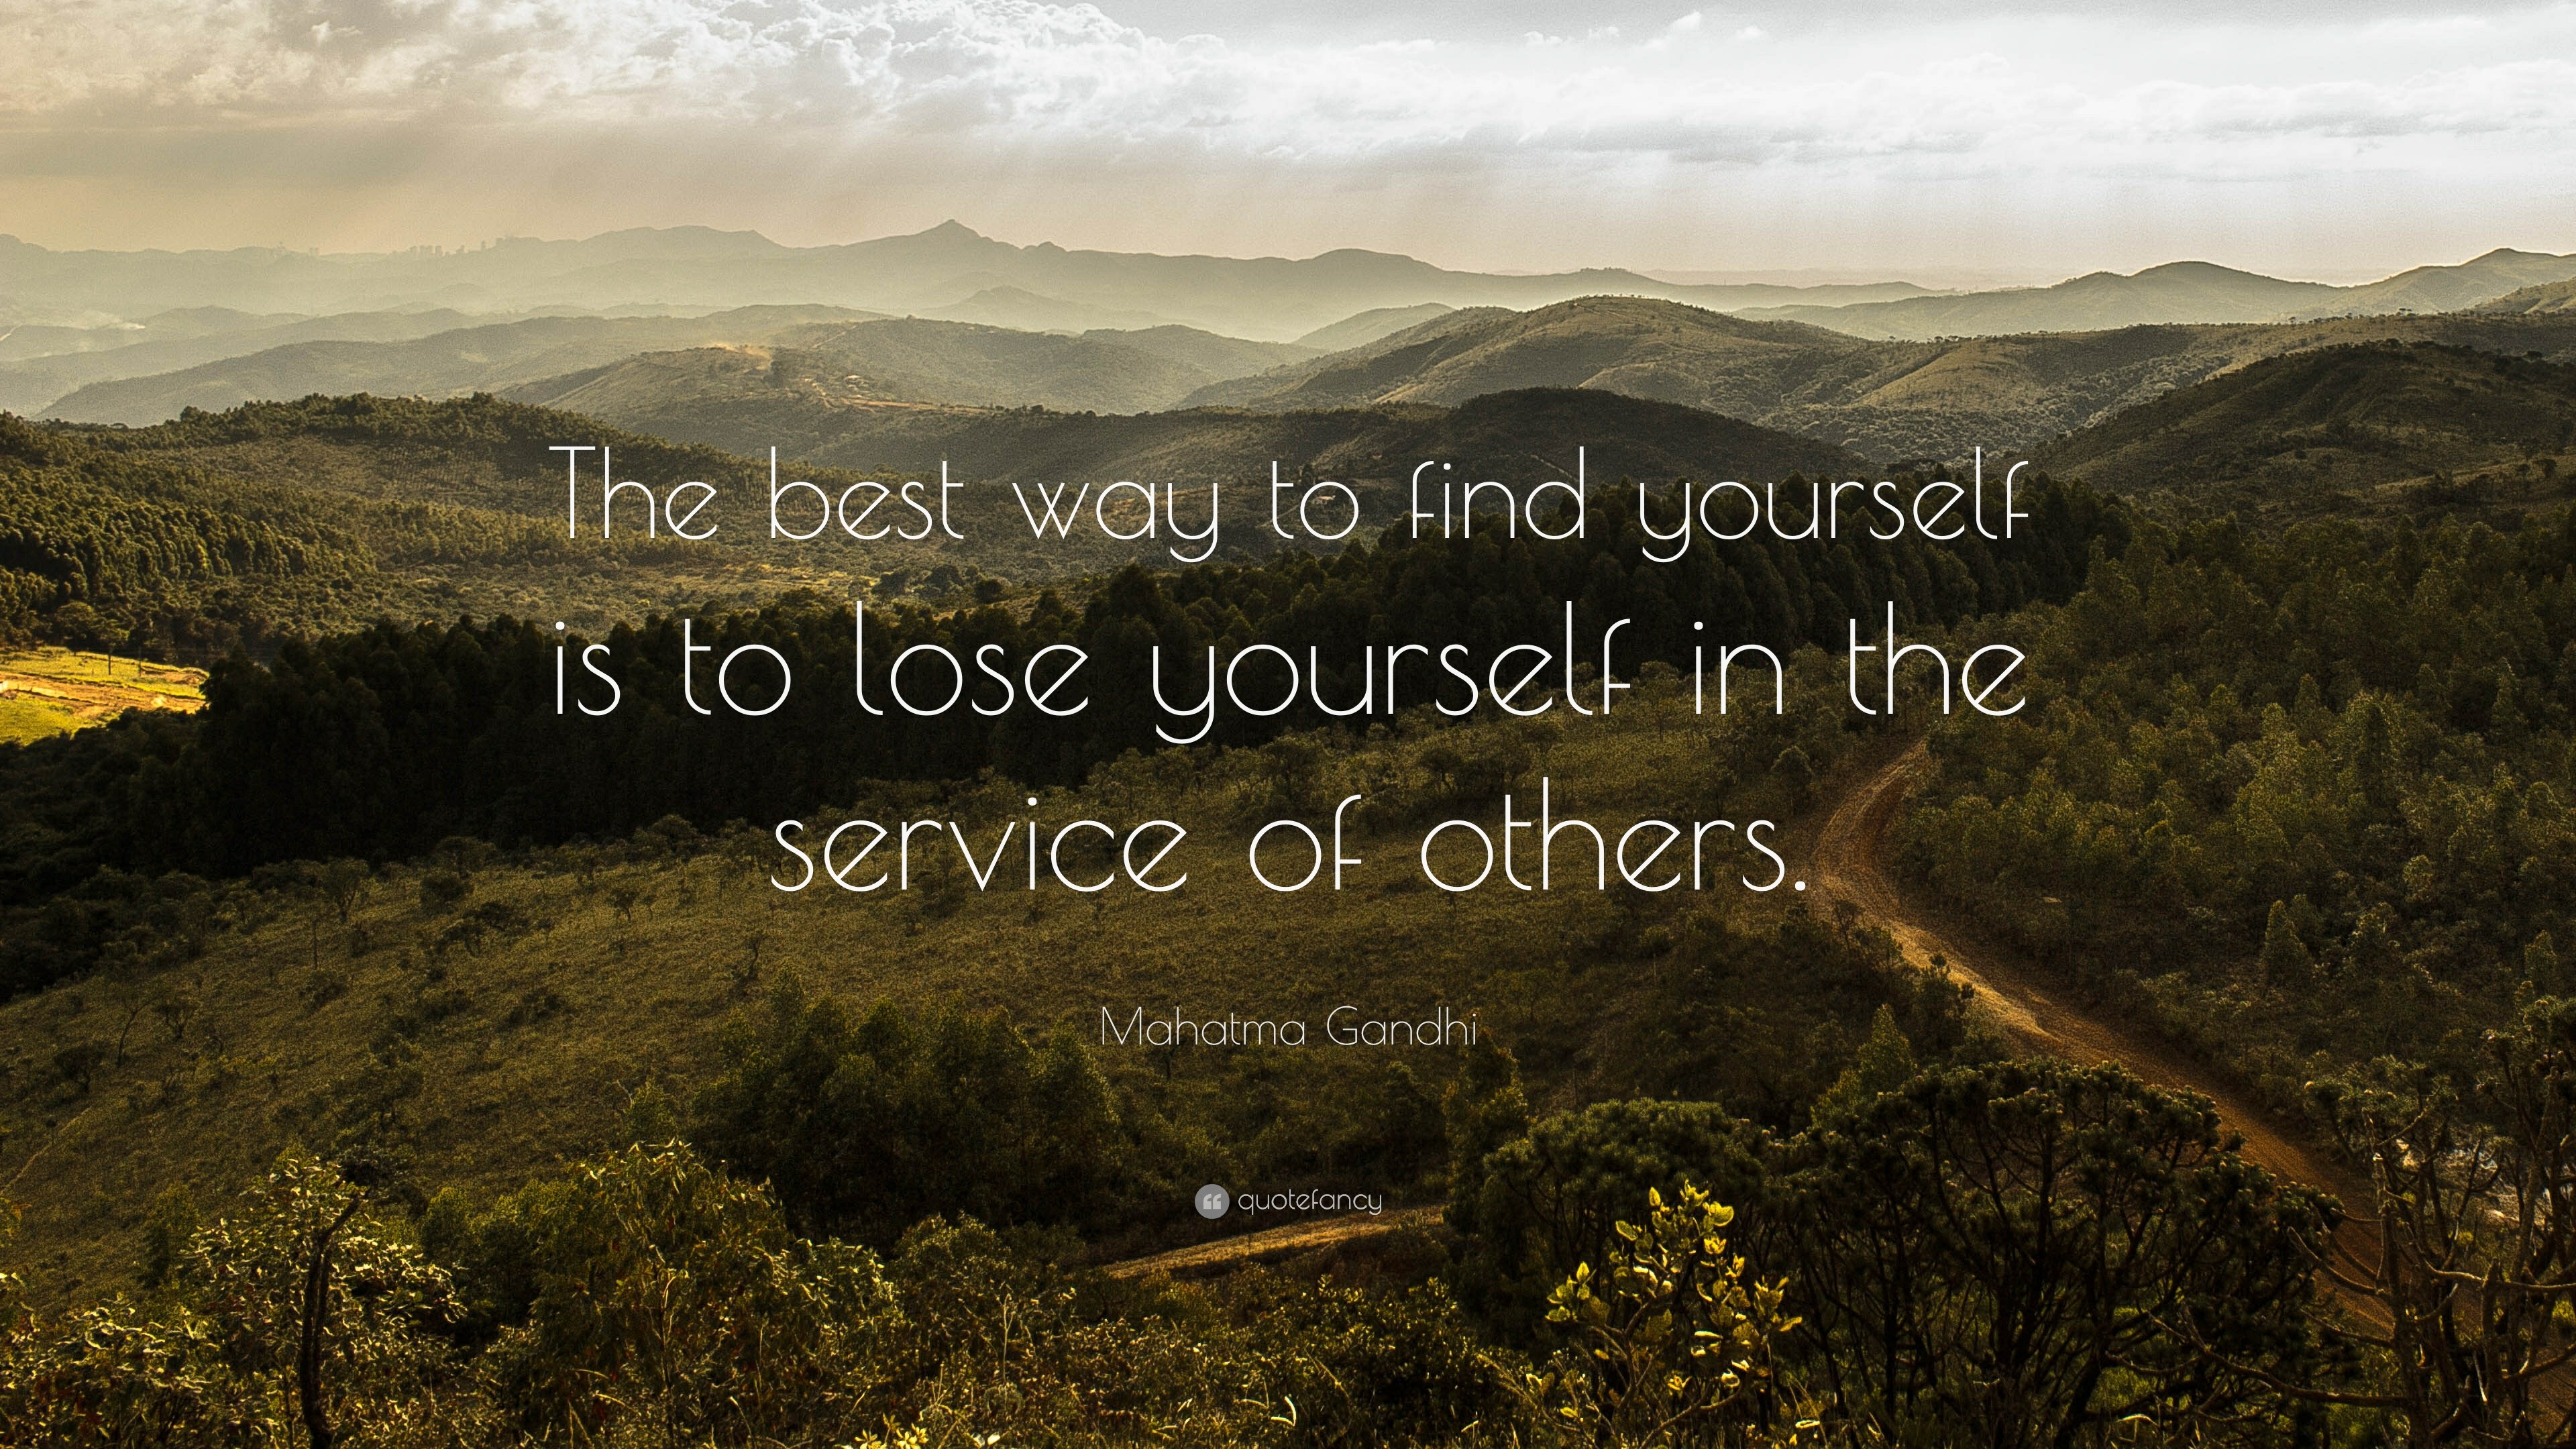 Mahatma Gandhi Quote: “The best way to find yourself is to lose ...